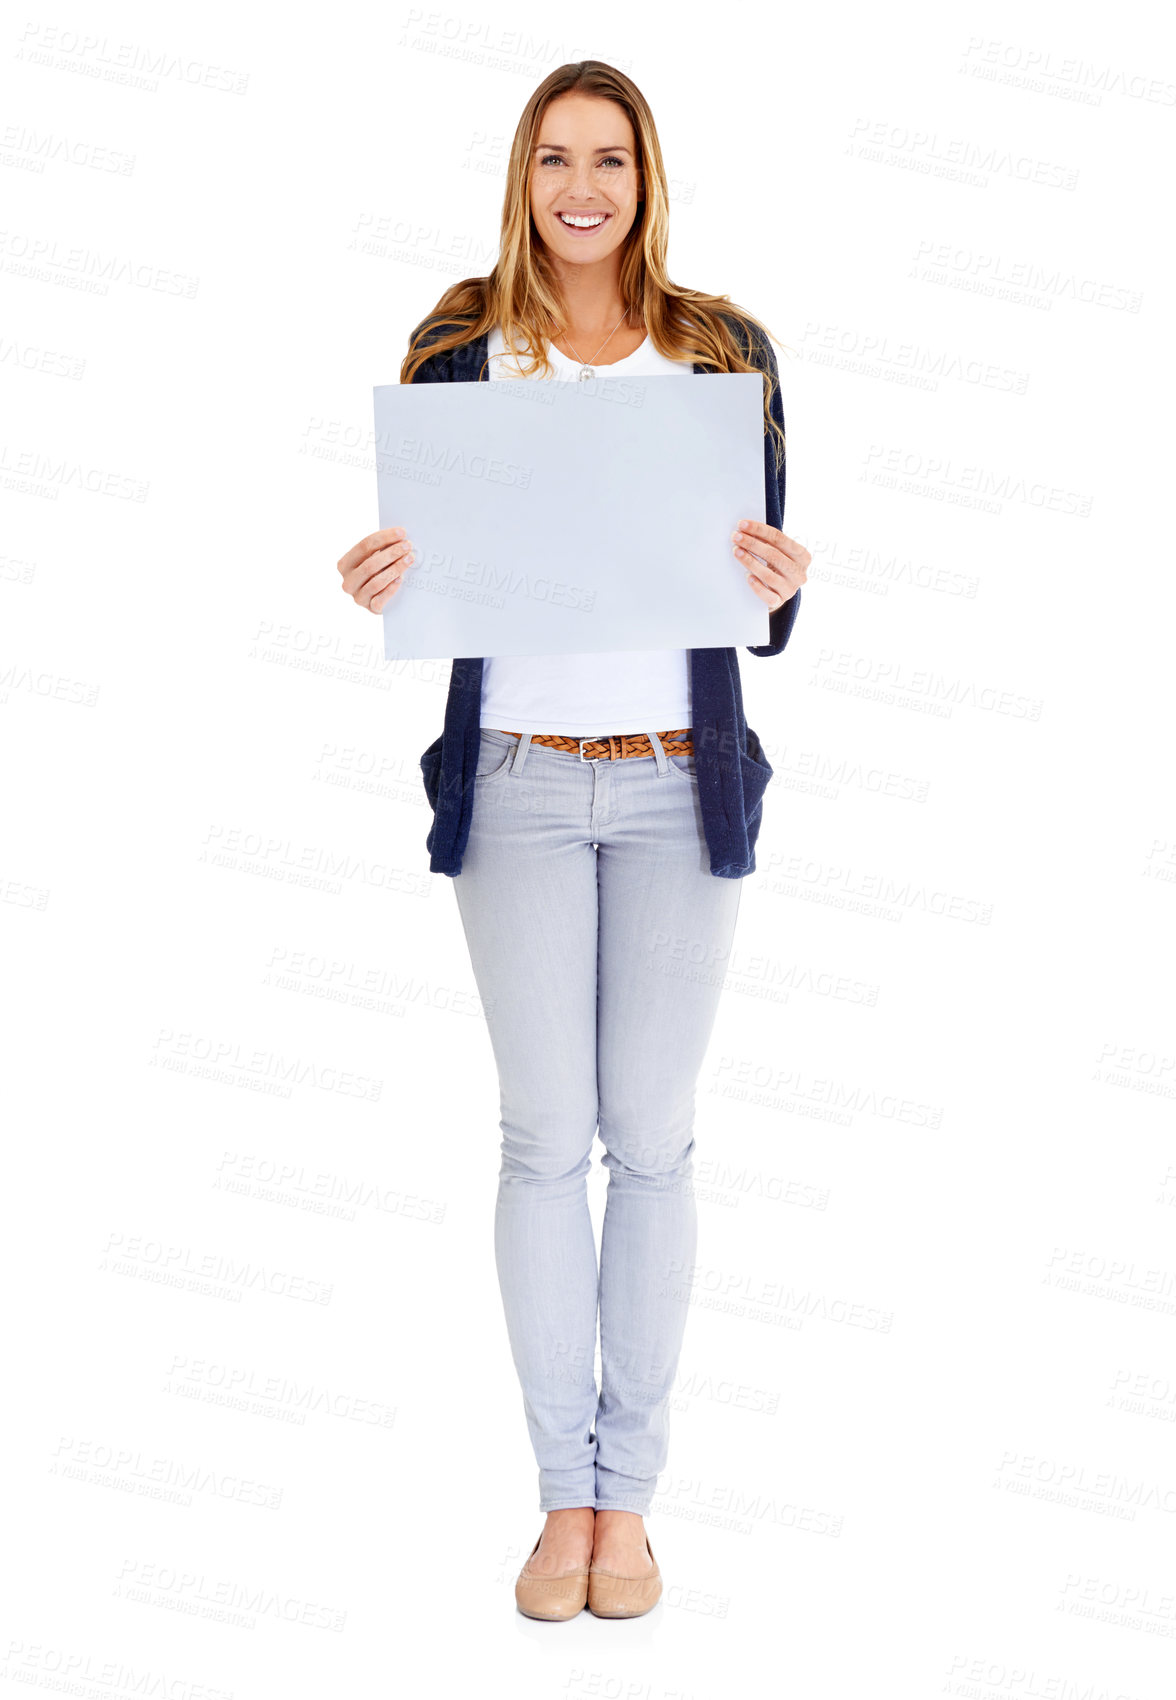 Buy stock photo A beautiful woman holding a blank placard